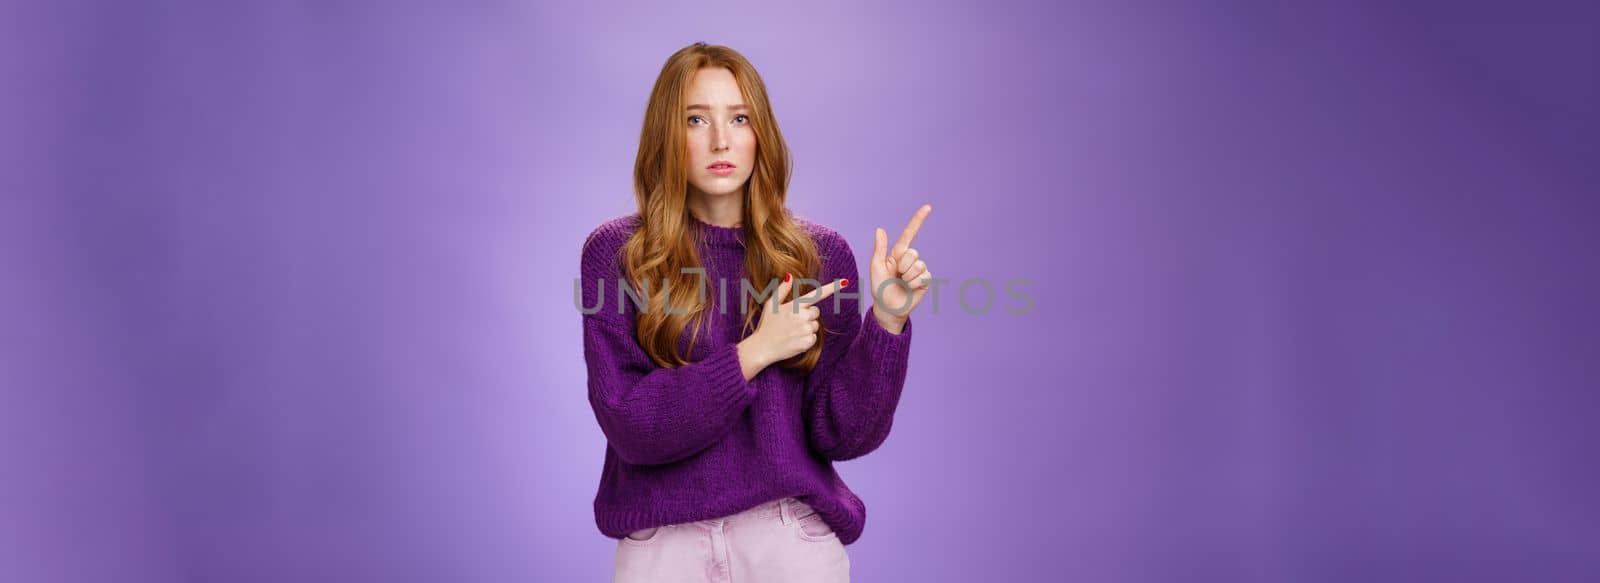 Lifestyle. Upset and gloomy woman in sorrow feeling regret of missing huge sales looking reckelss and unhappy pointing questioned at upper left corner with hopeless expression over purple background.